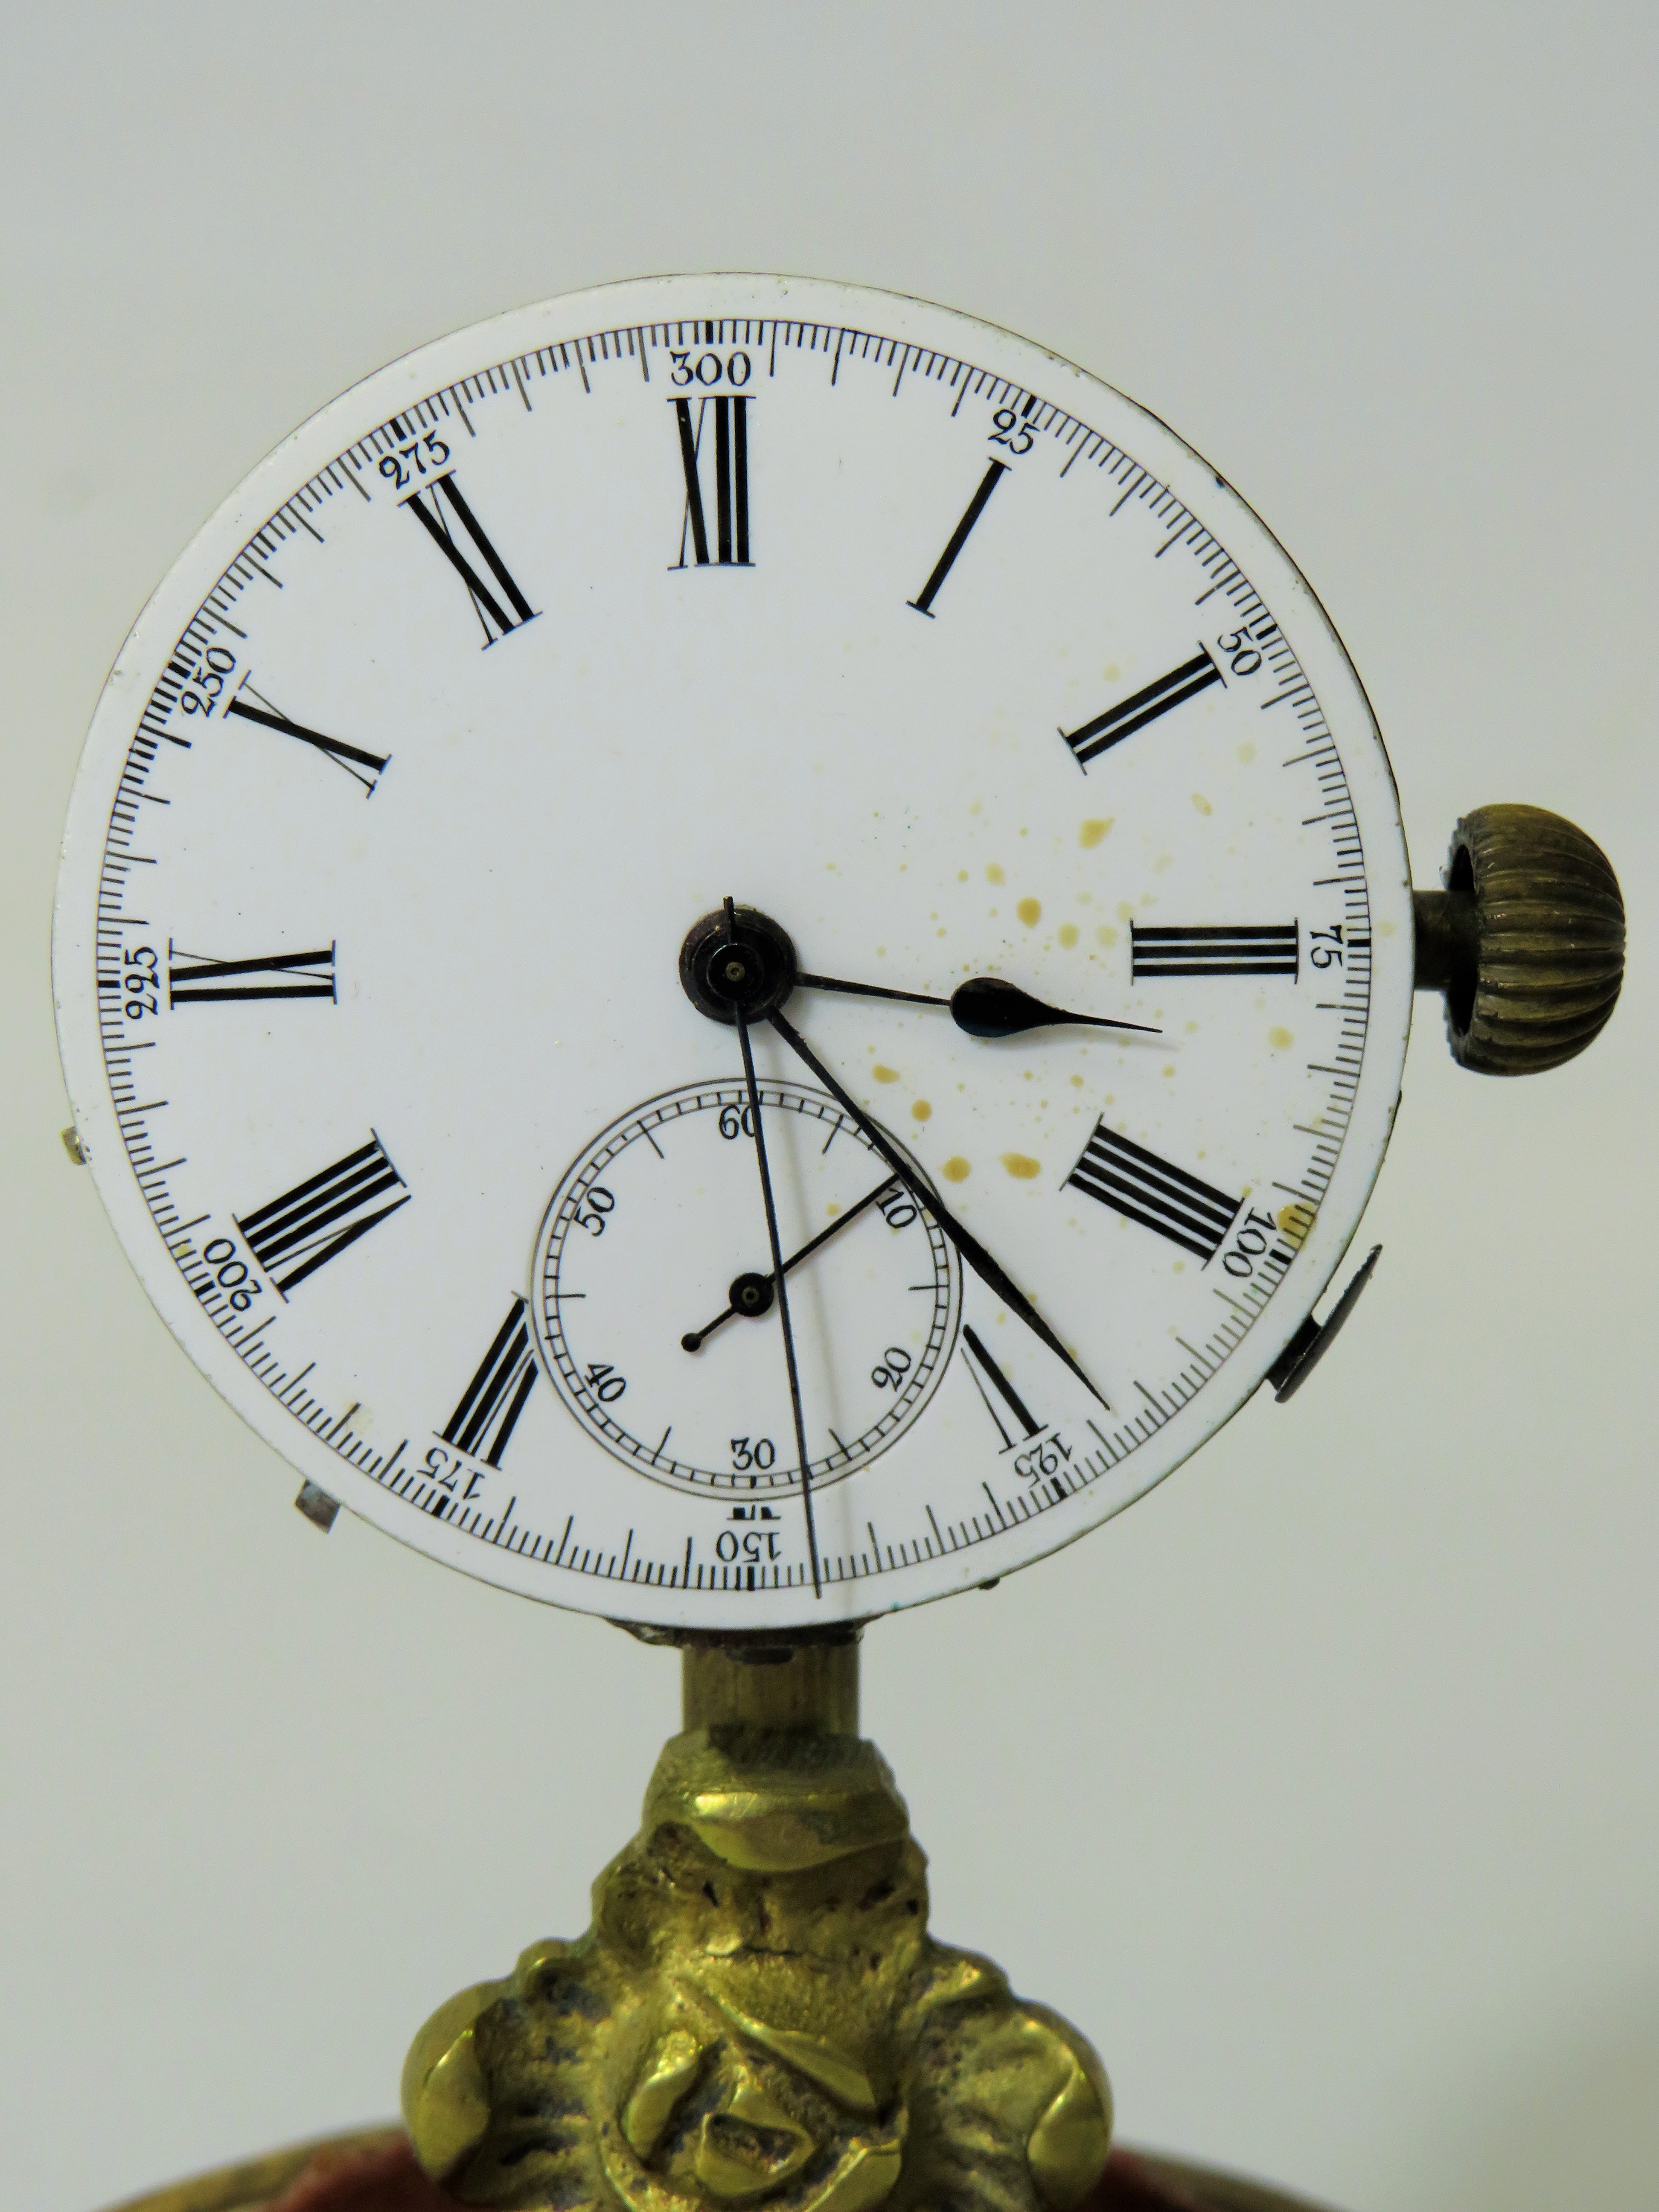 Unusual enamel faced Pocket watch which has been mounted on a brass and wooden stand and under a gla - Image 3 of 4